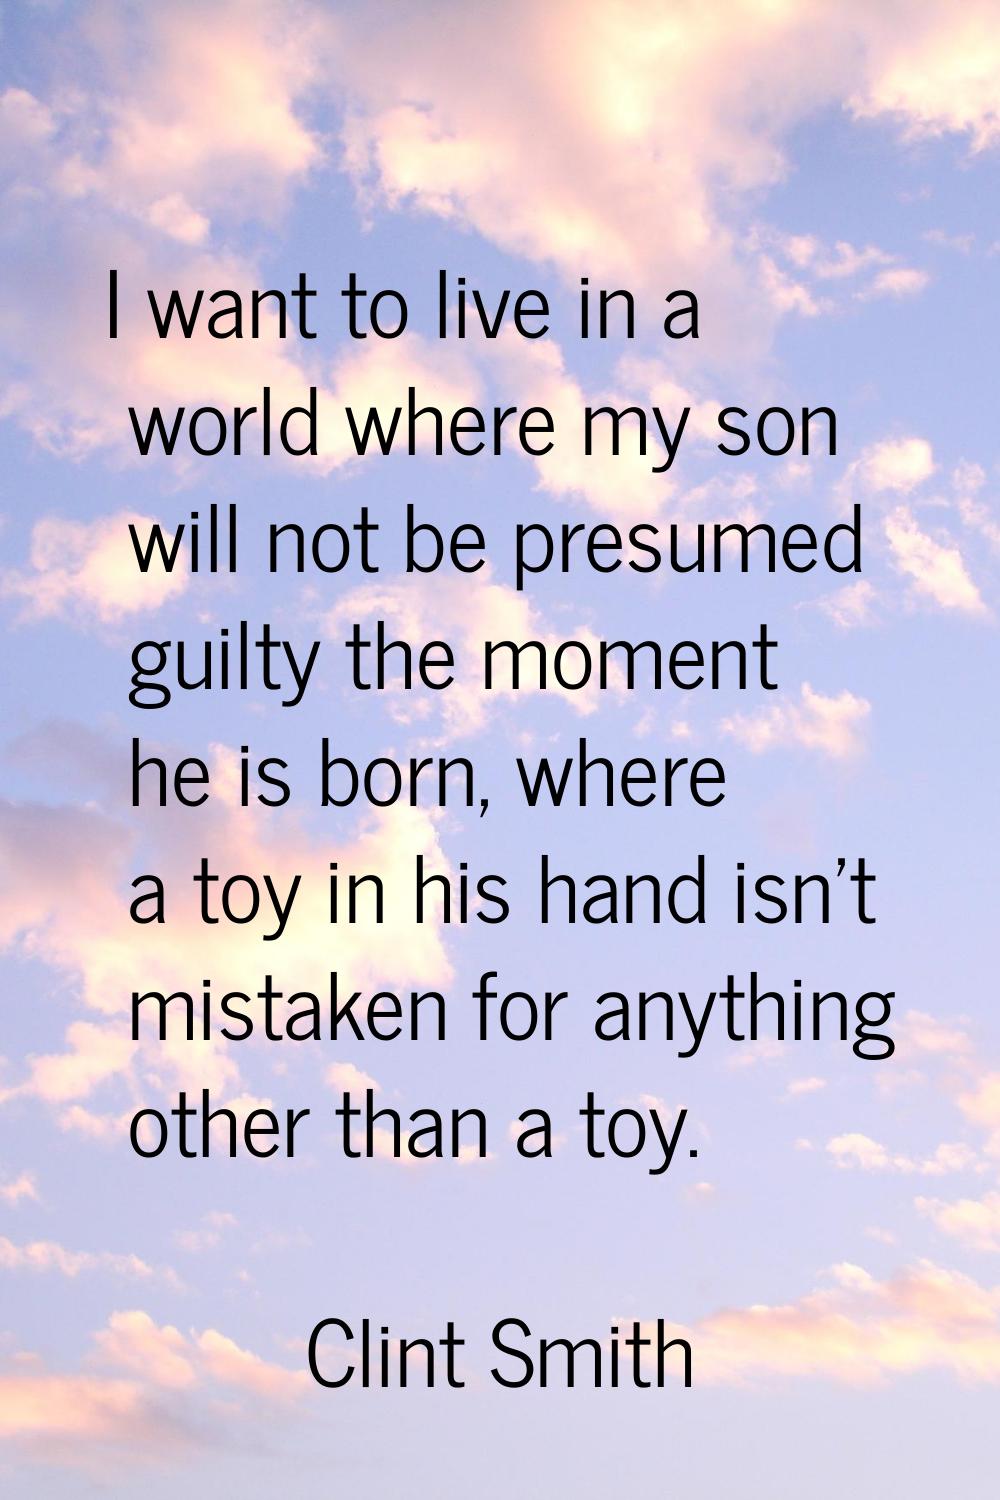 I want to live in a world where my son will not be presumed guilty the moment he is born, where a t